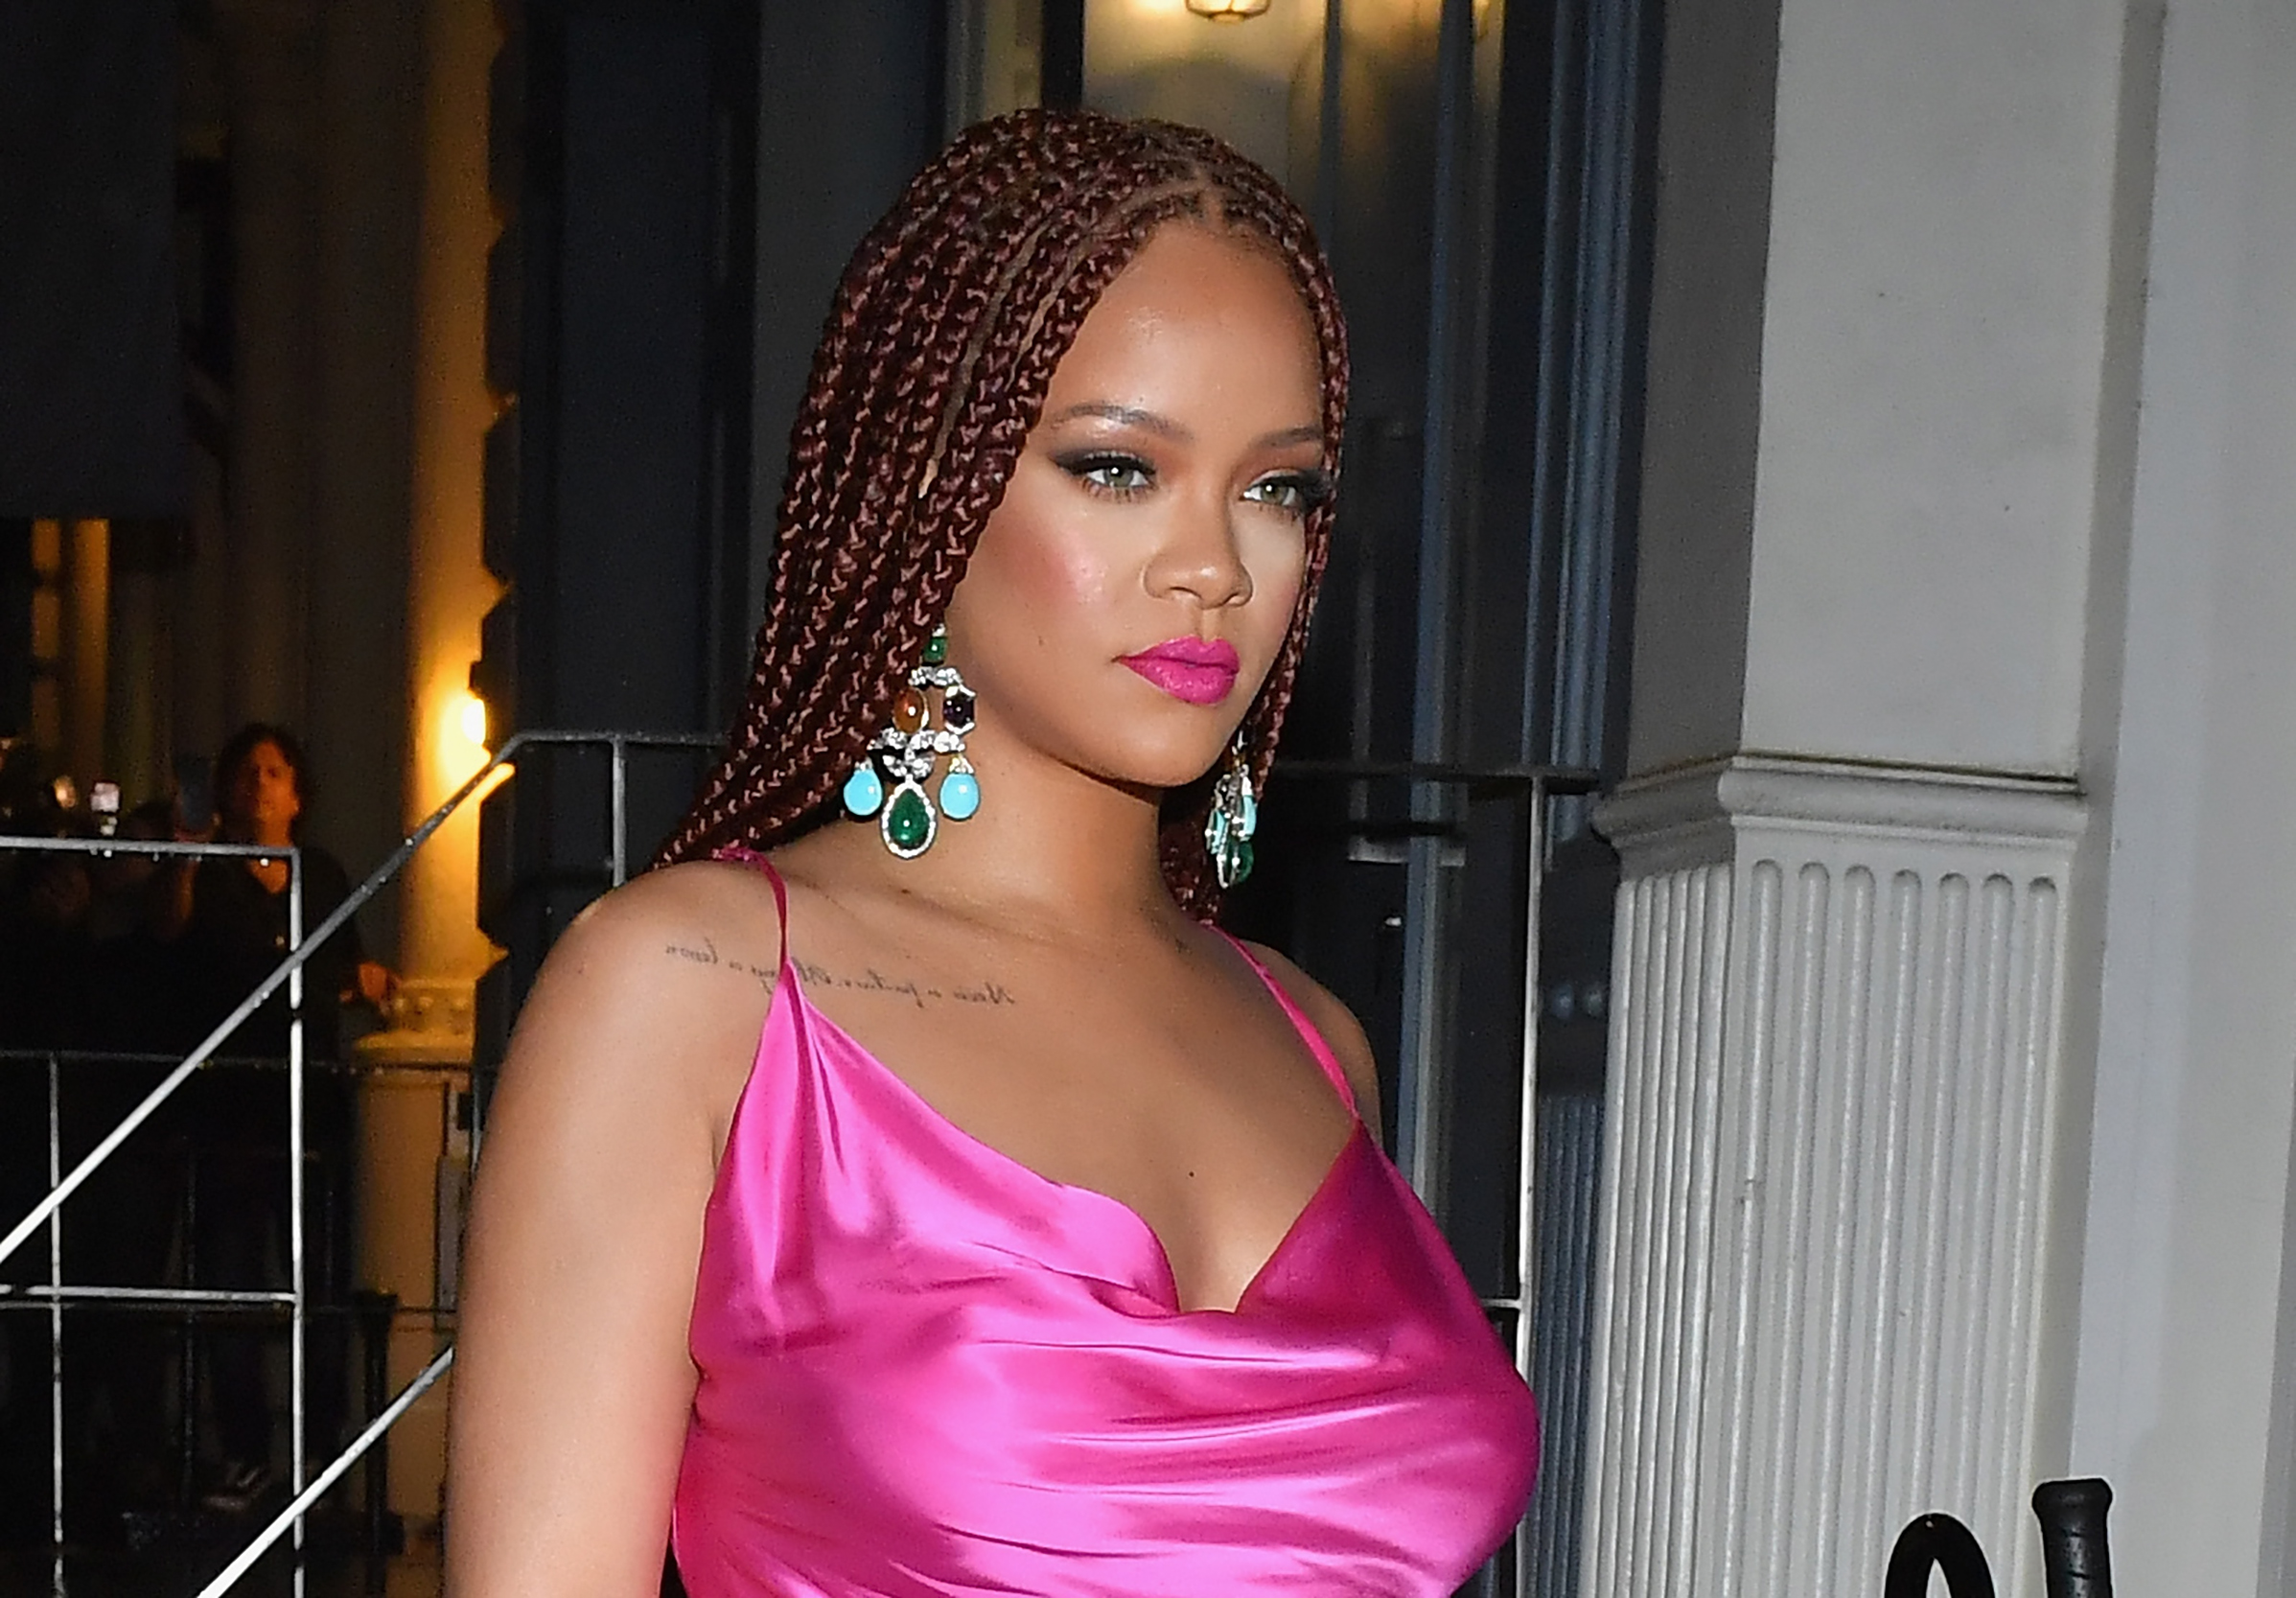 Rihanna On Forbes: “It’s Like You’re Awarding People For Being Rich, It’s Weird”